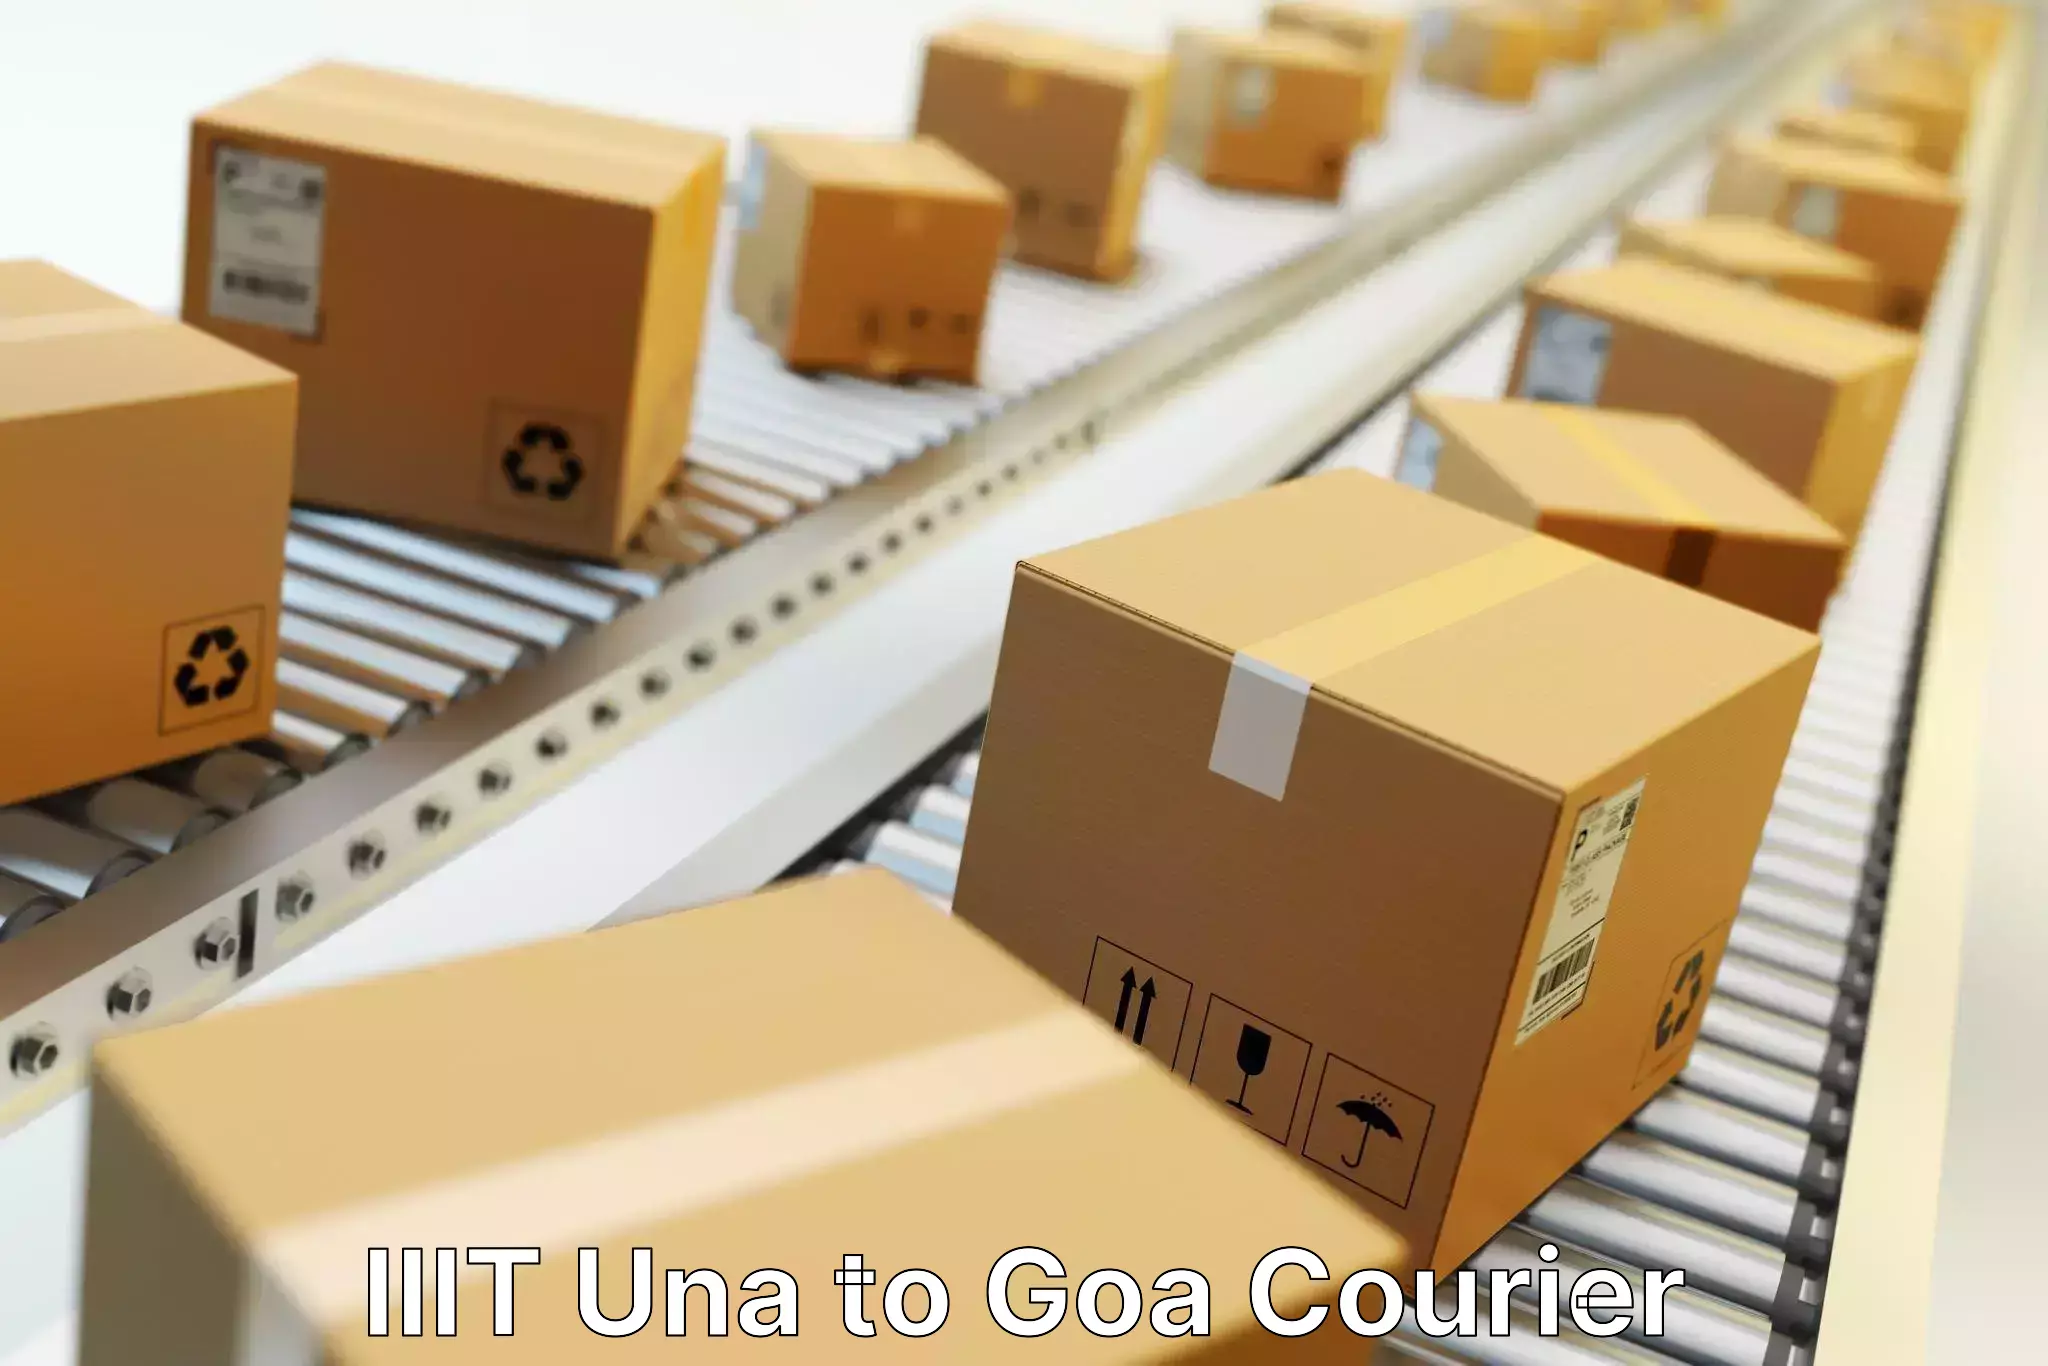 Rural area delivery IIIT Una to South Goa